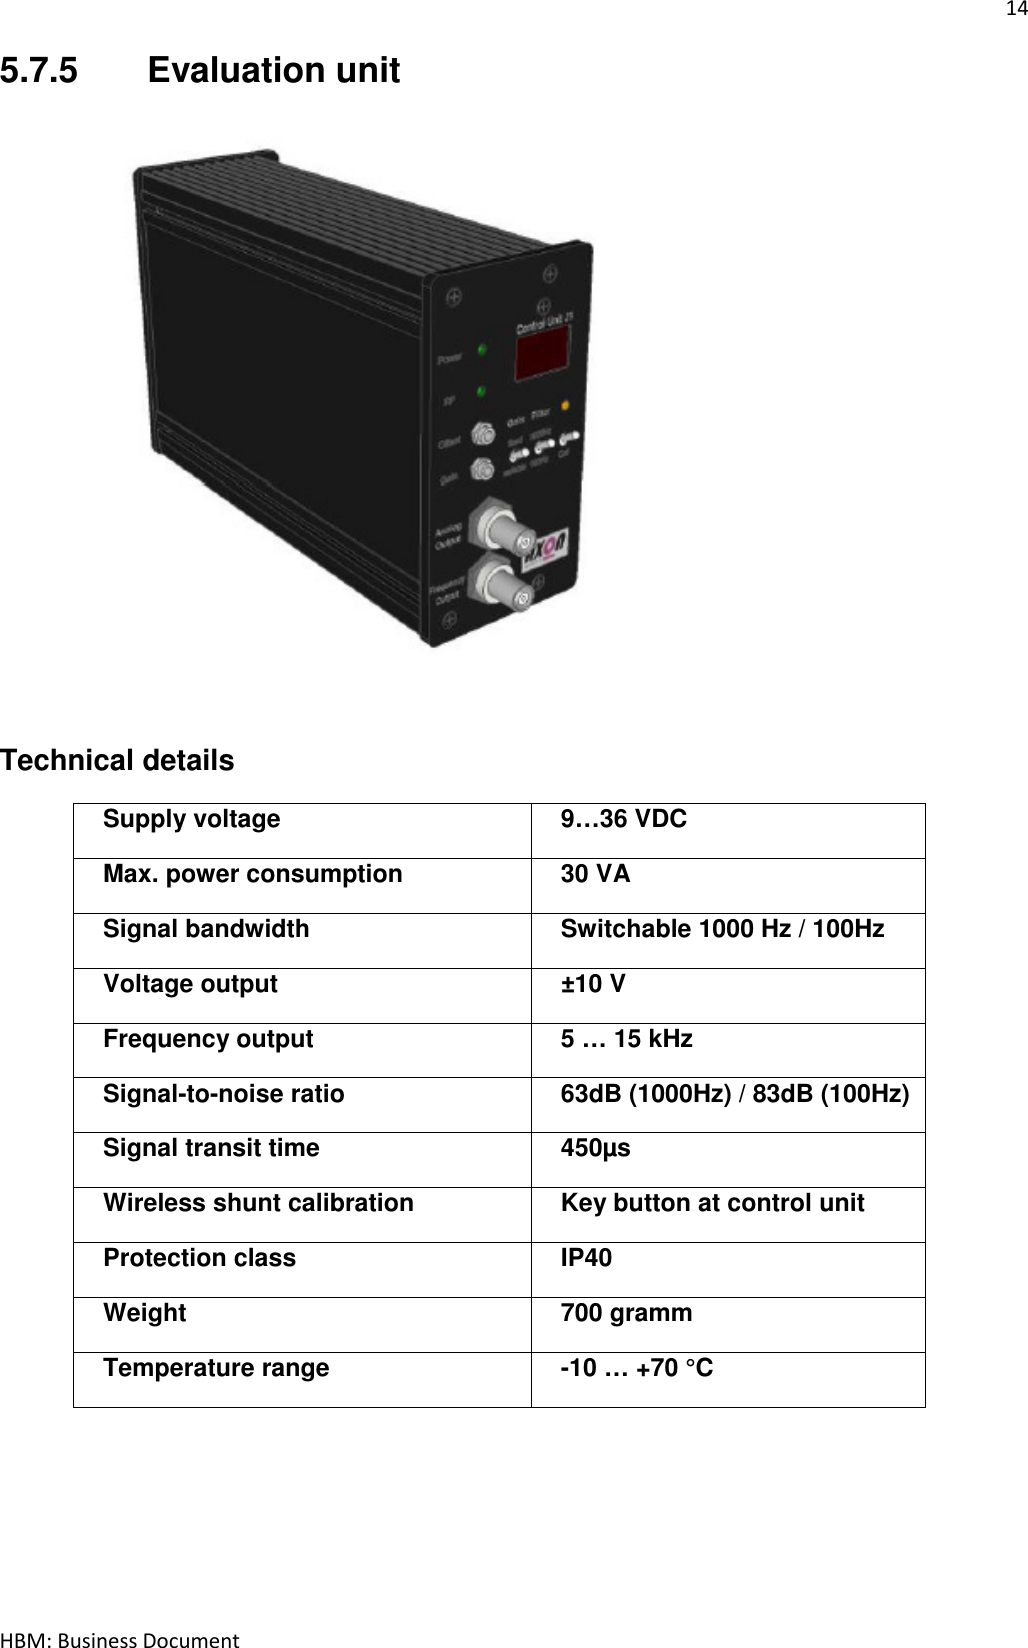 14  HBM: Business Document 5.7.5  Evaluation unit            Technical details Supply voltage  9…36 VDC Max. power consumption  30 VA Signal bandwidth  Switchable 1000 Hz / 100Hz Voltage output  ±10 V Frequency output  5 … 15 kHz  Signal-to-noise ratio  63dB (1000Hz) / 83dB (100Hz) Signal transit time  450µs Wireless shunt calibration  Key button at control unit Protection class  IP40 Weight  700 gramm Temperature range  -10 … +70 °C  